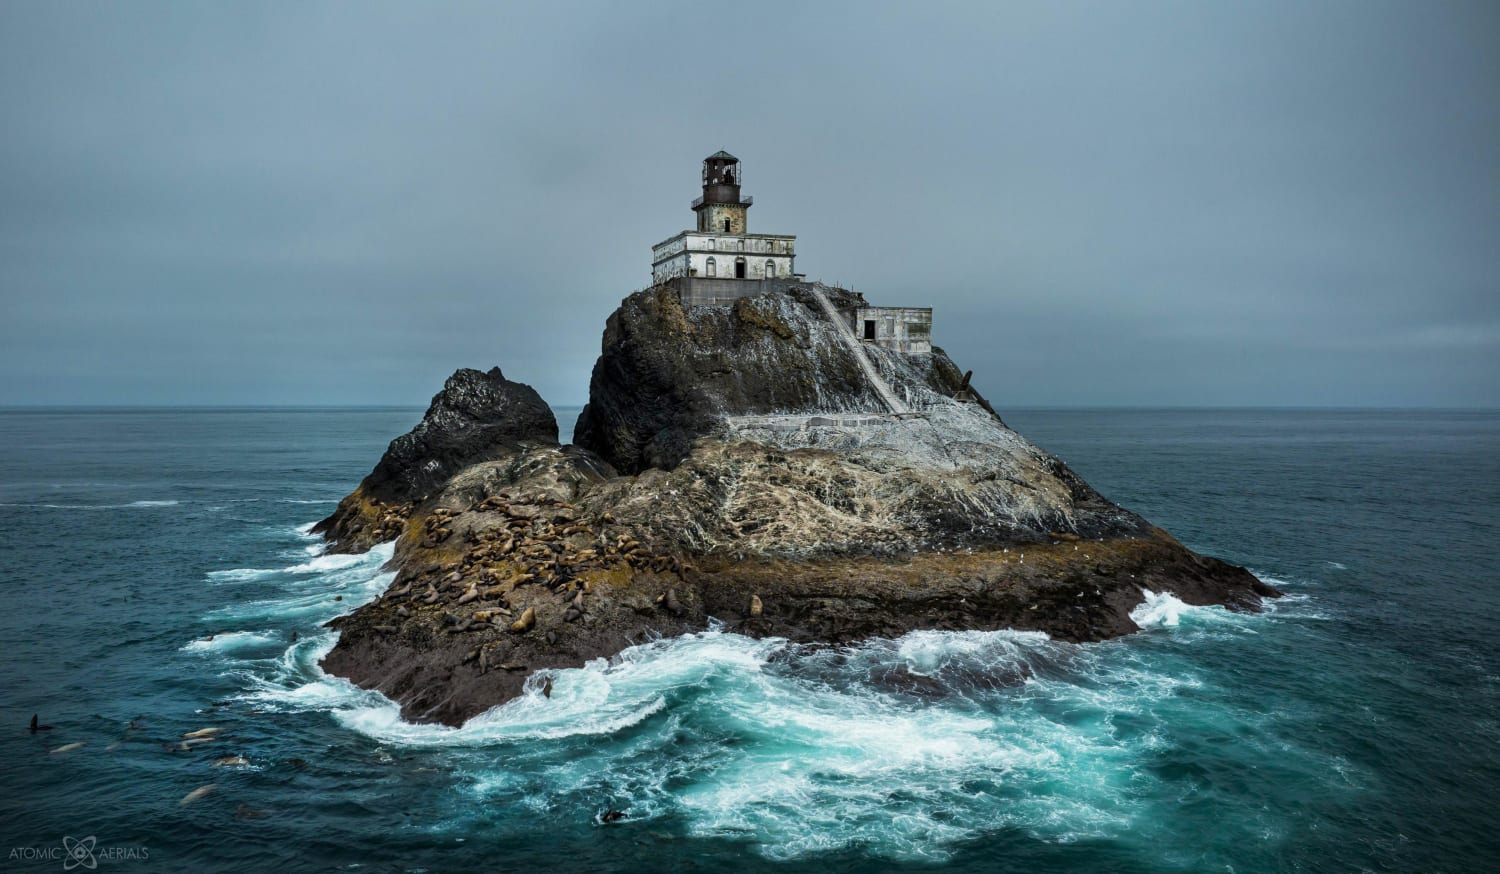 'Terrible Tilly' - the Tillamook Lighthouse off the Oregon coast, built in 1881 it was abandoned 75 years later due to the dangerous location. It is now privately-owned and was used as a columbarium for several decades. Currently listed for sale for $6.5 million